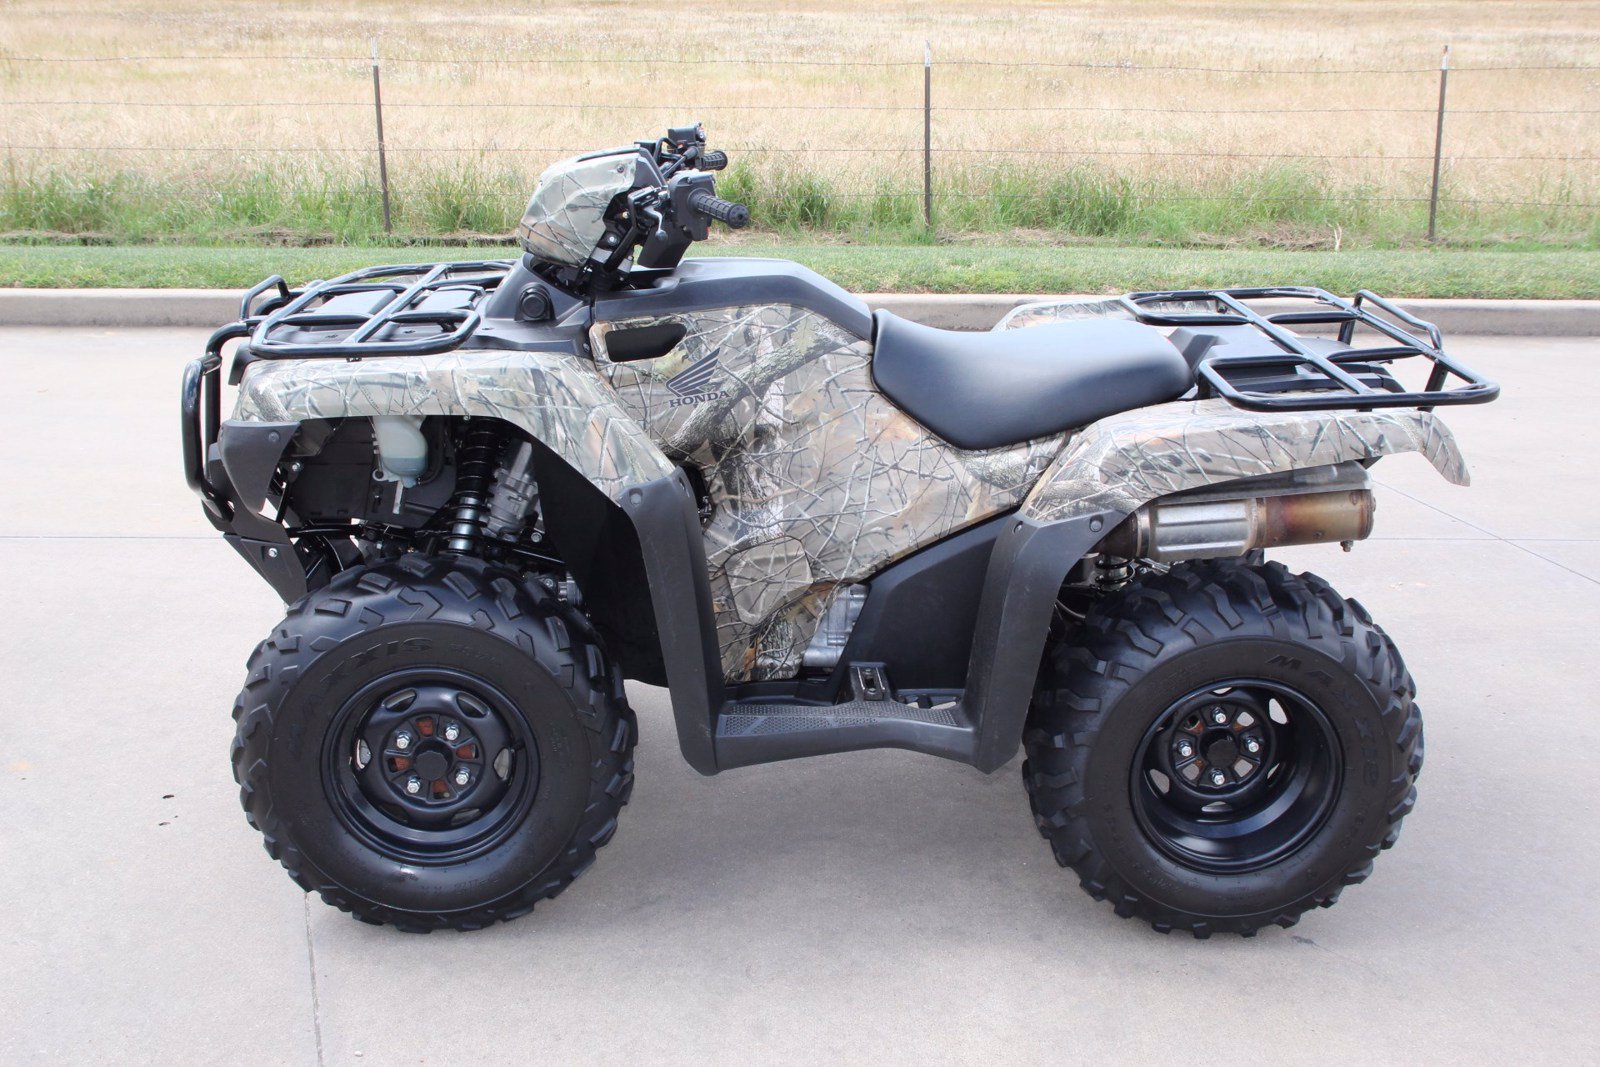 PreOwned 2017 Honda Fourtrax Foreman TRX 500 in Tyler